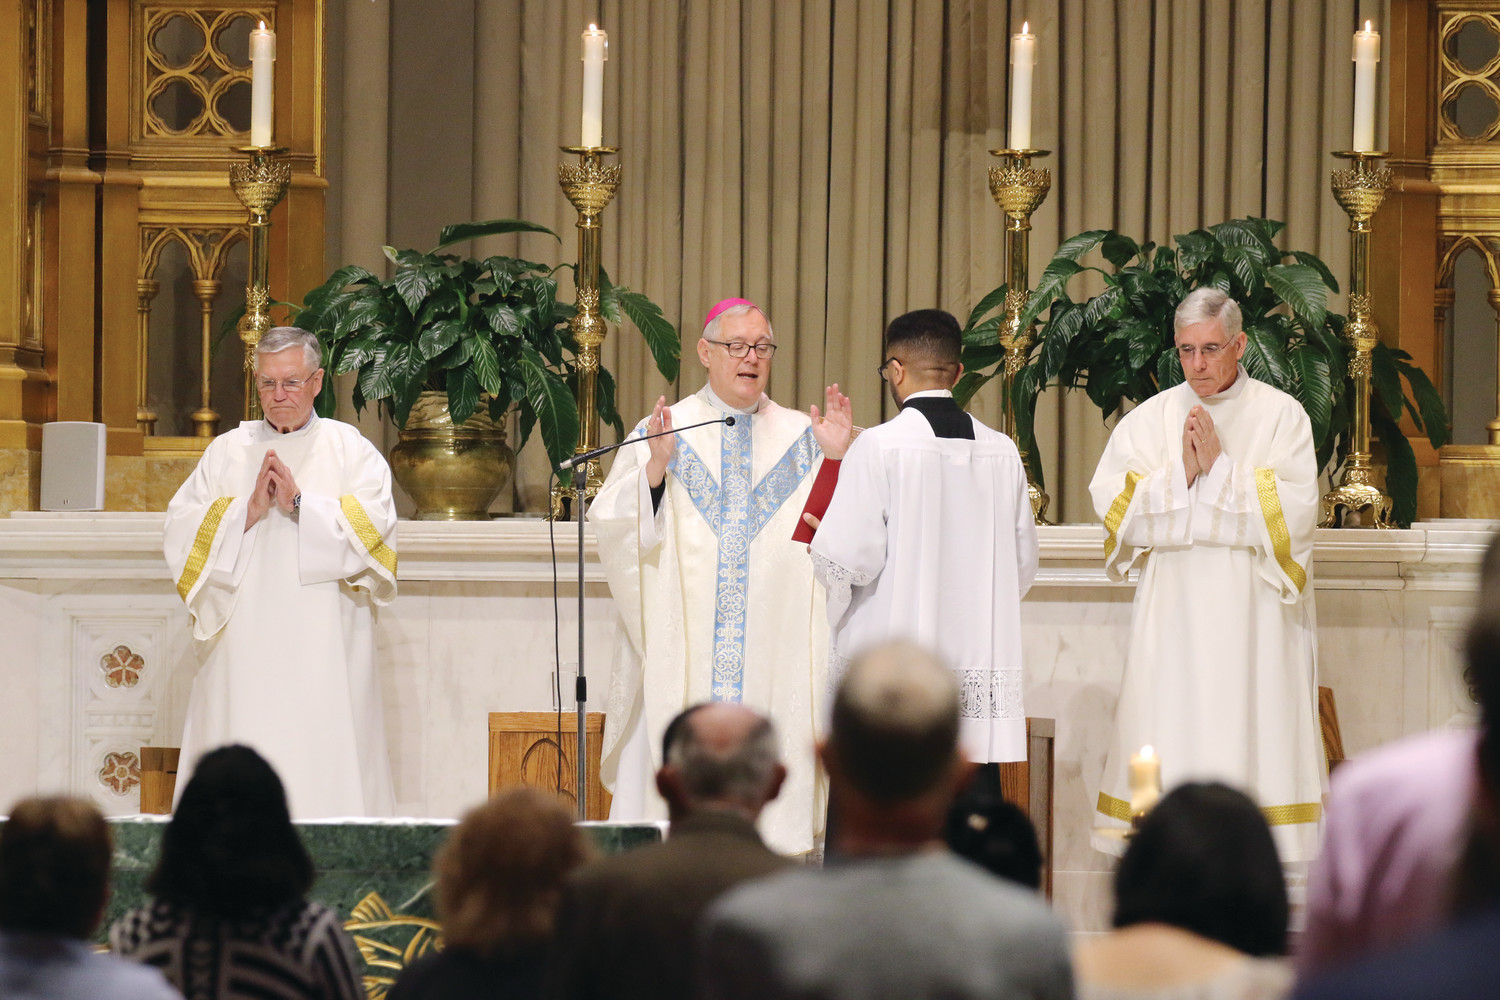 Bishop Thomas J. Tobin celebrates Mass on Monday, May 21, recognizing the inaugural feast in honor of Mary, Mother of the Church. Deacons James Walsh, left, and Noel Edsall assisted.